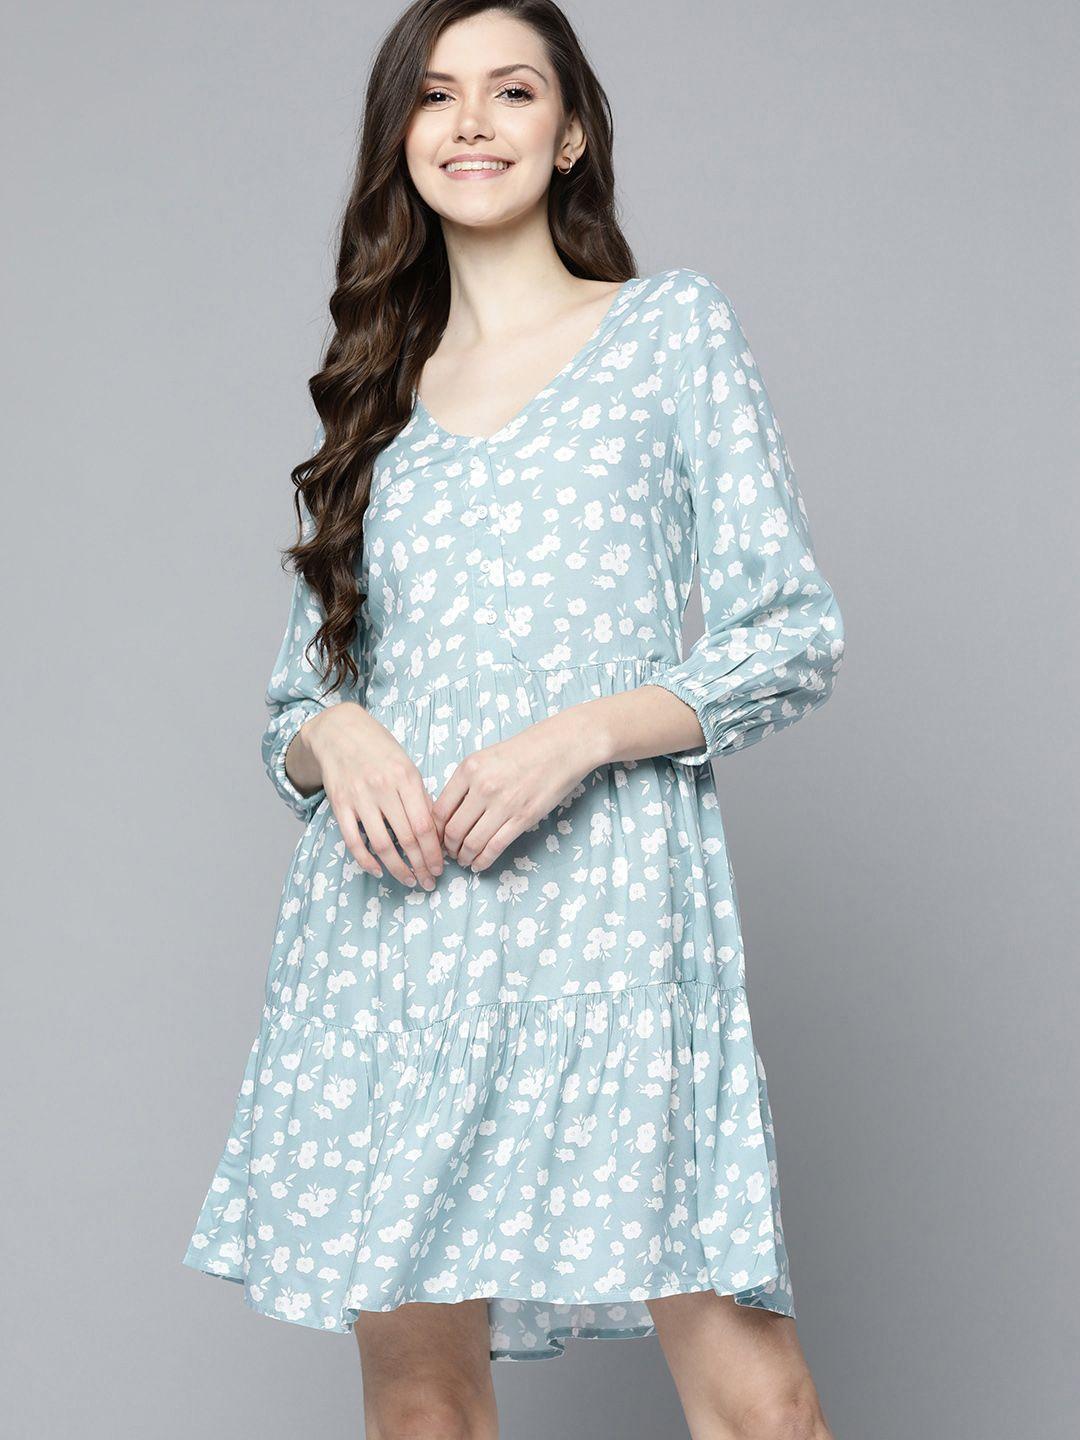 m&h our water blue & white floral a-line dress